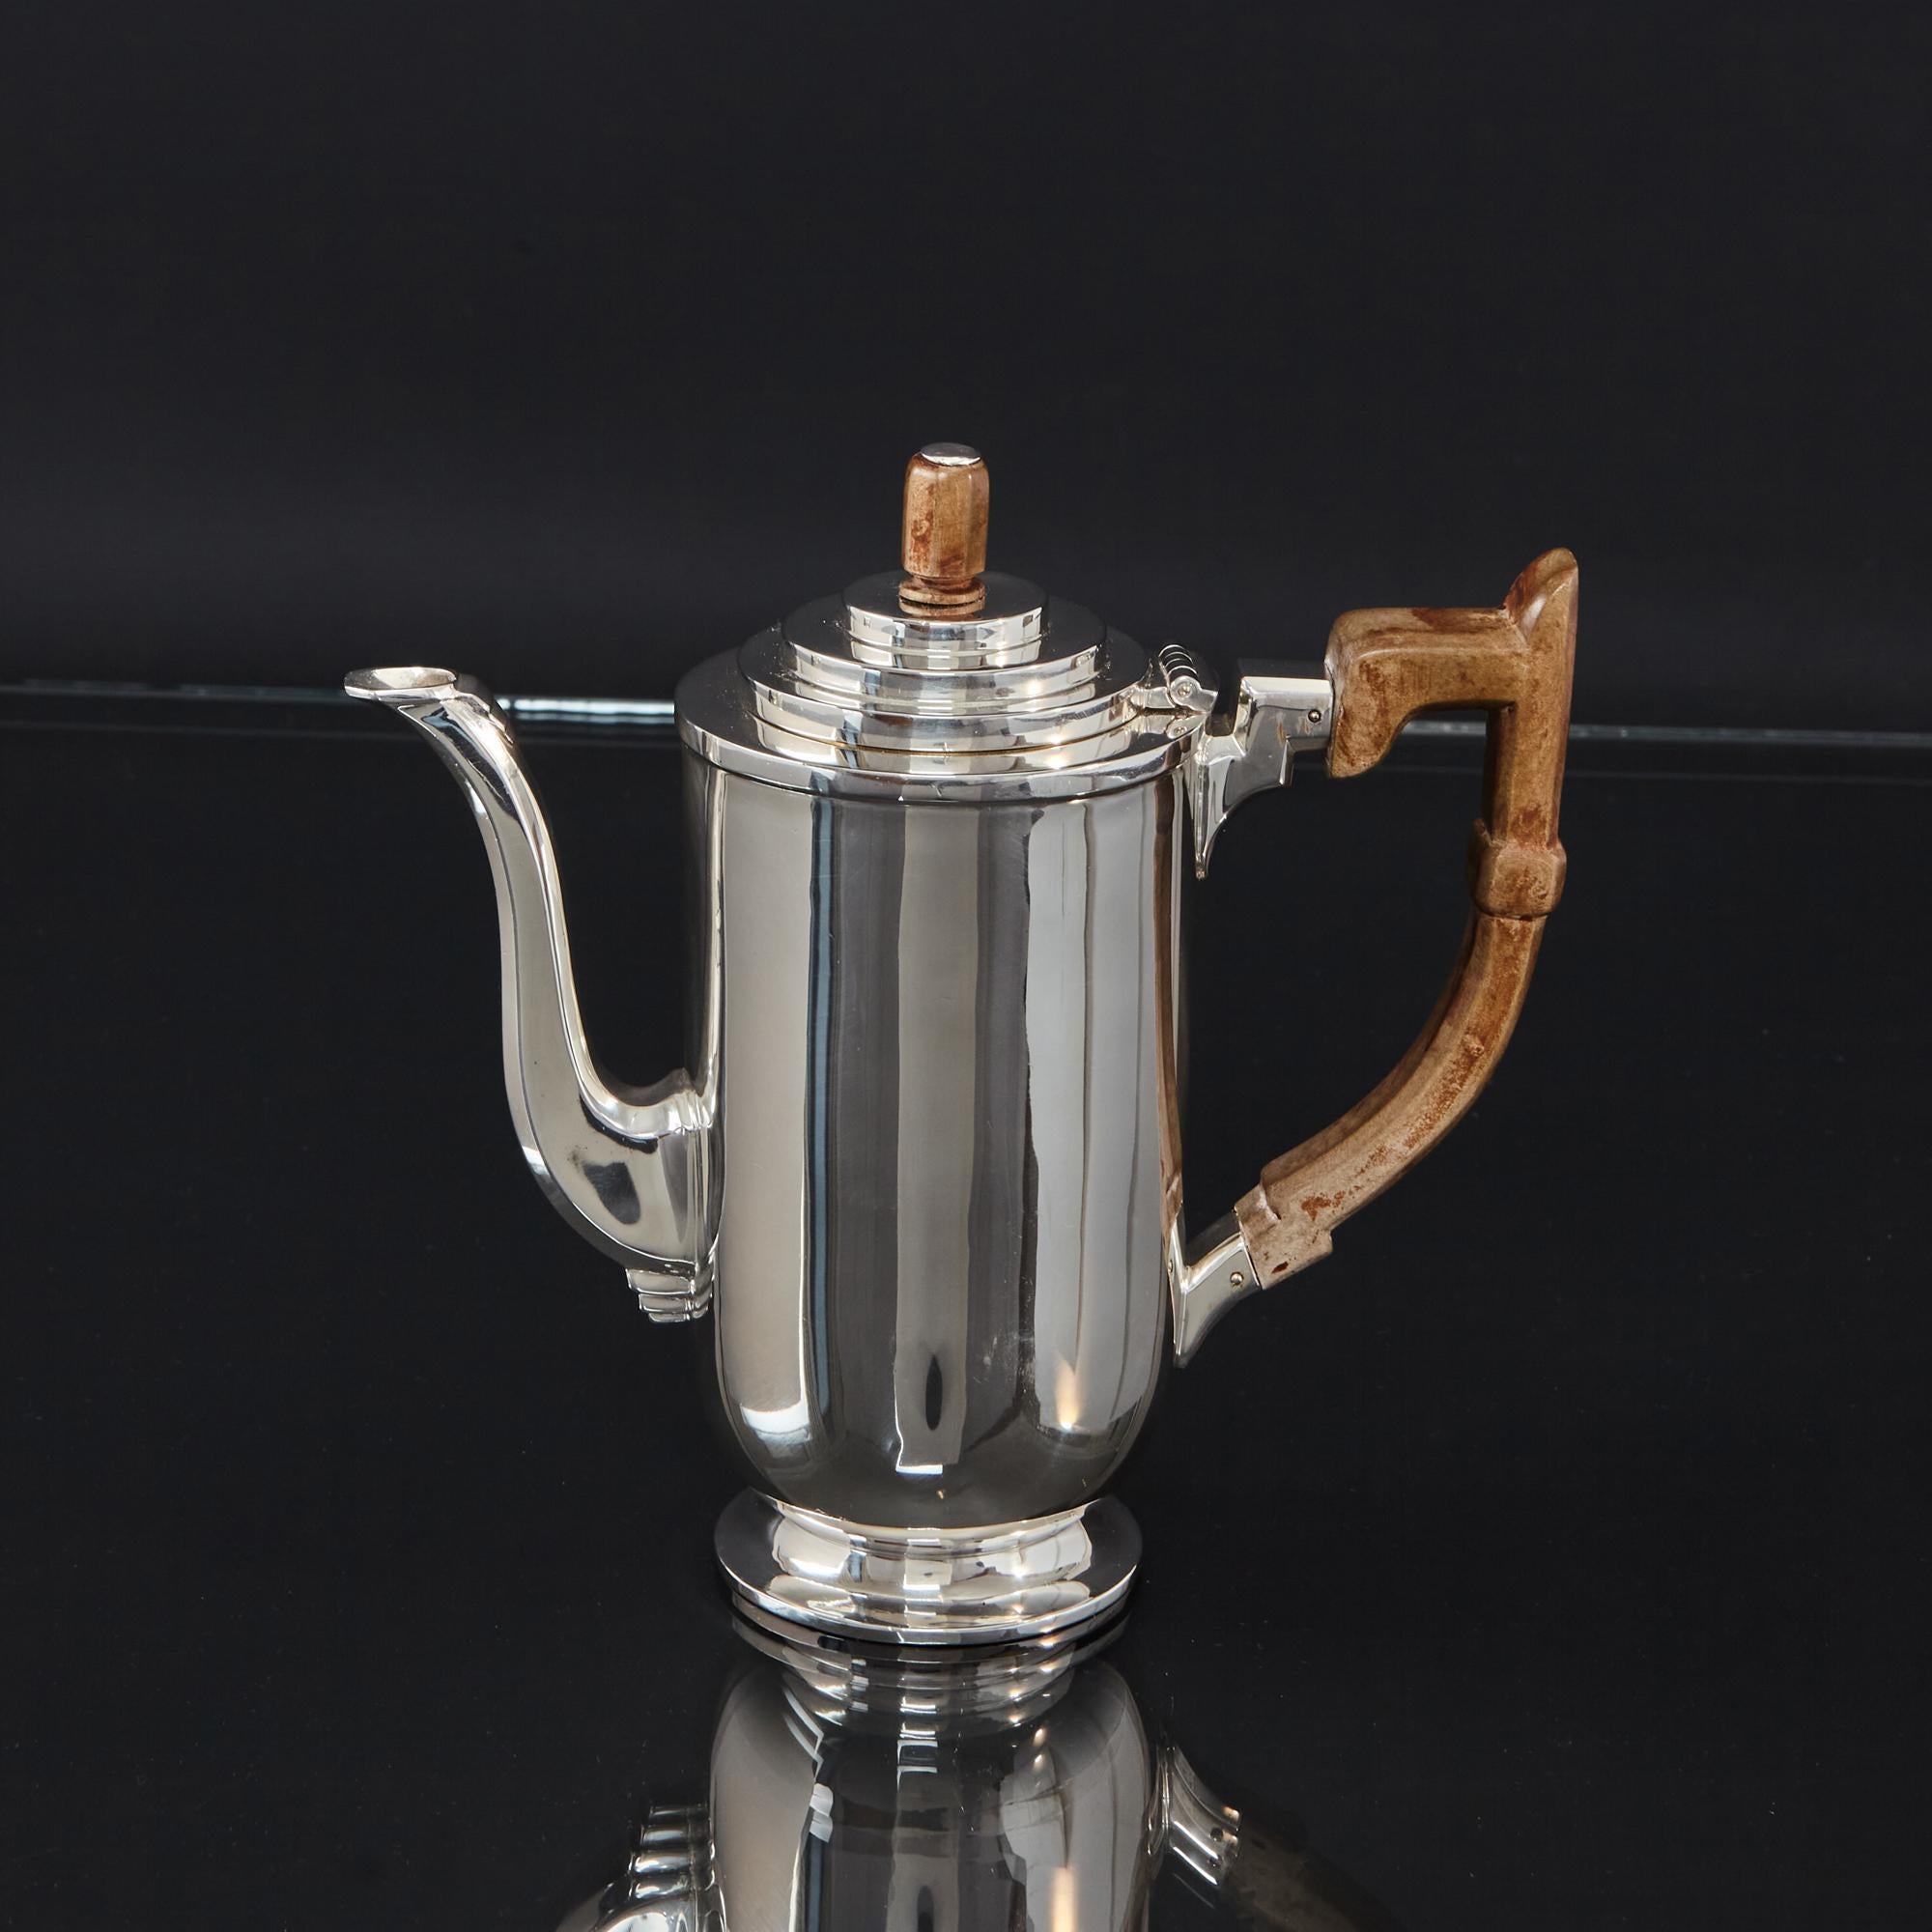 Very stylish silver coffee pot with wooden handle and finial, featuring all the design motifs of the Art Deco era . The stepped lid, elongated finial, panelled spout and handle all personify the design cues of the era. The round body is of straight